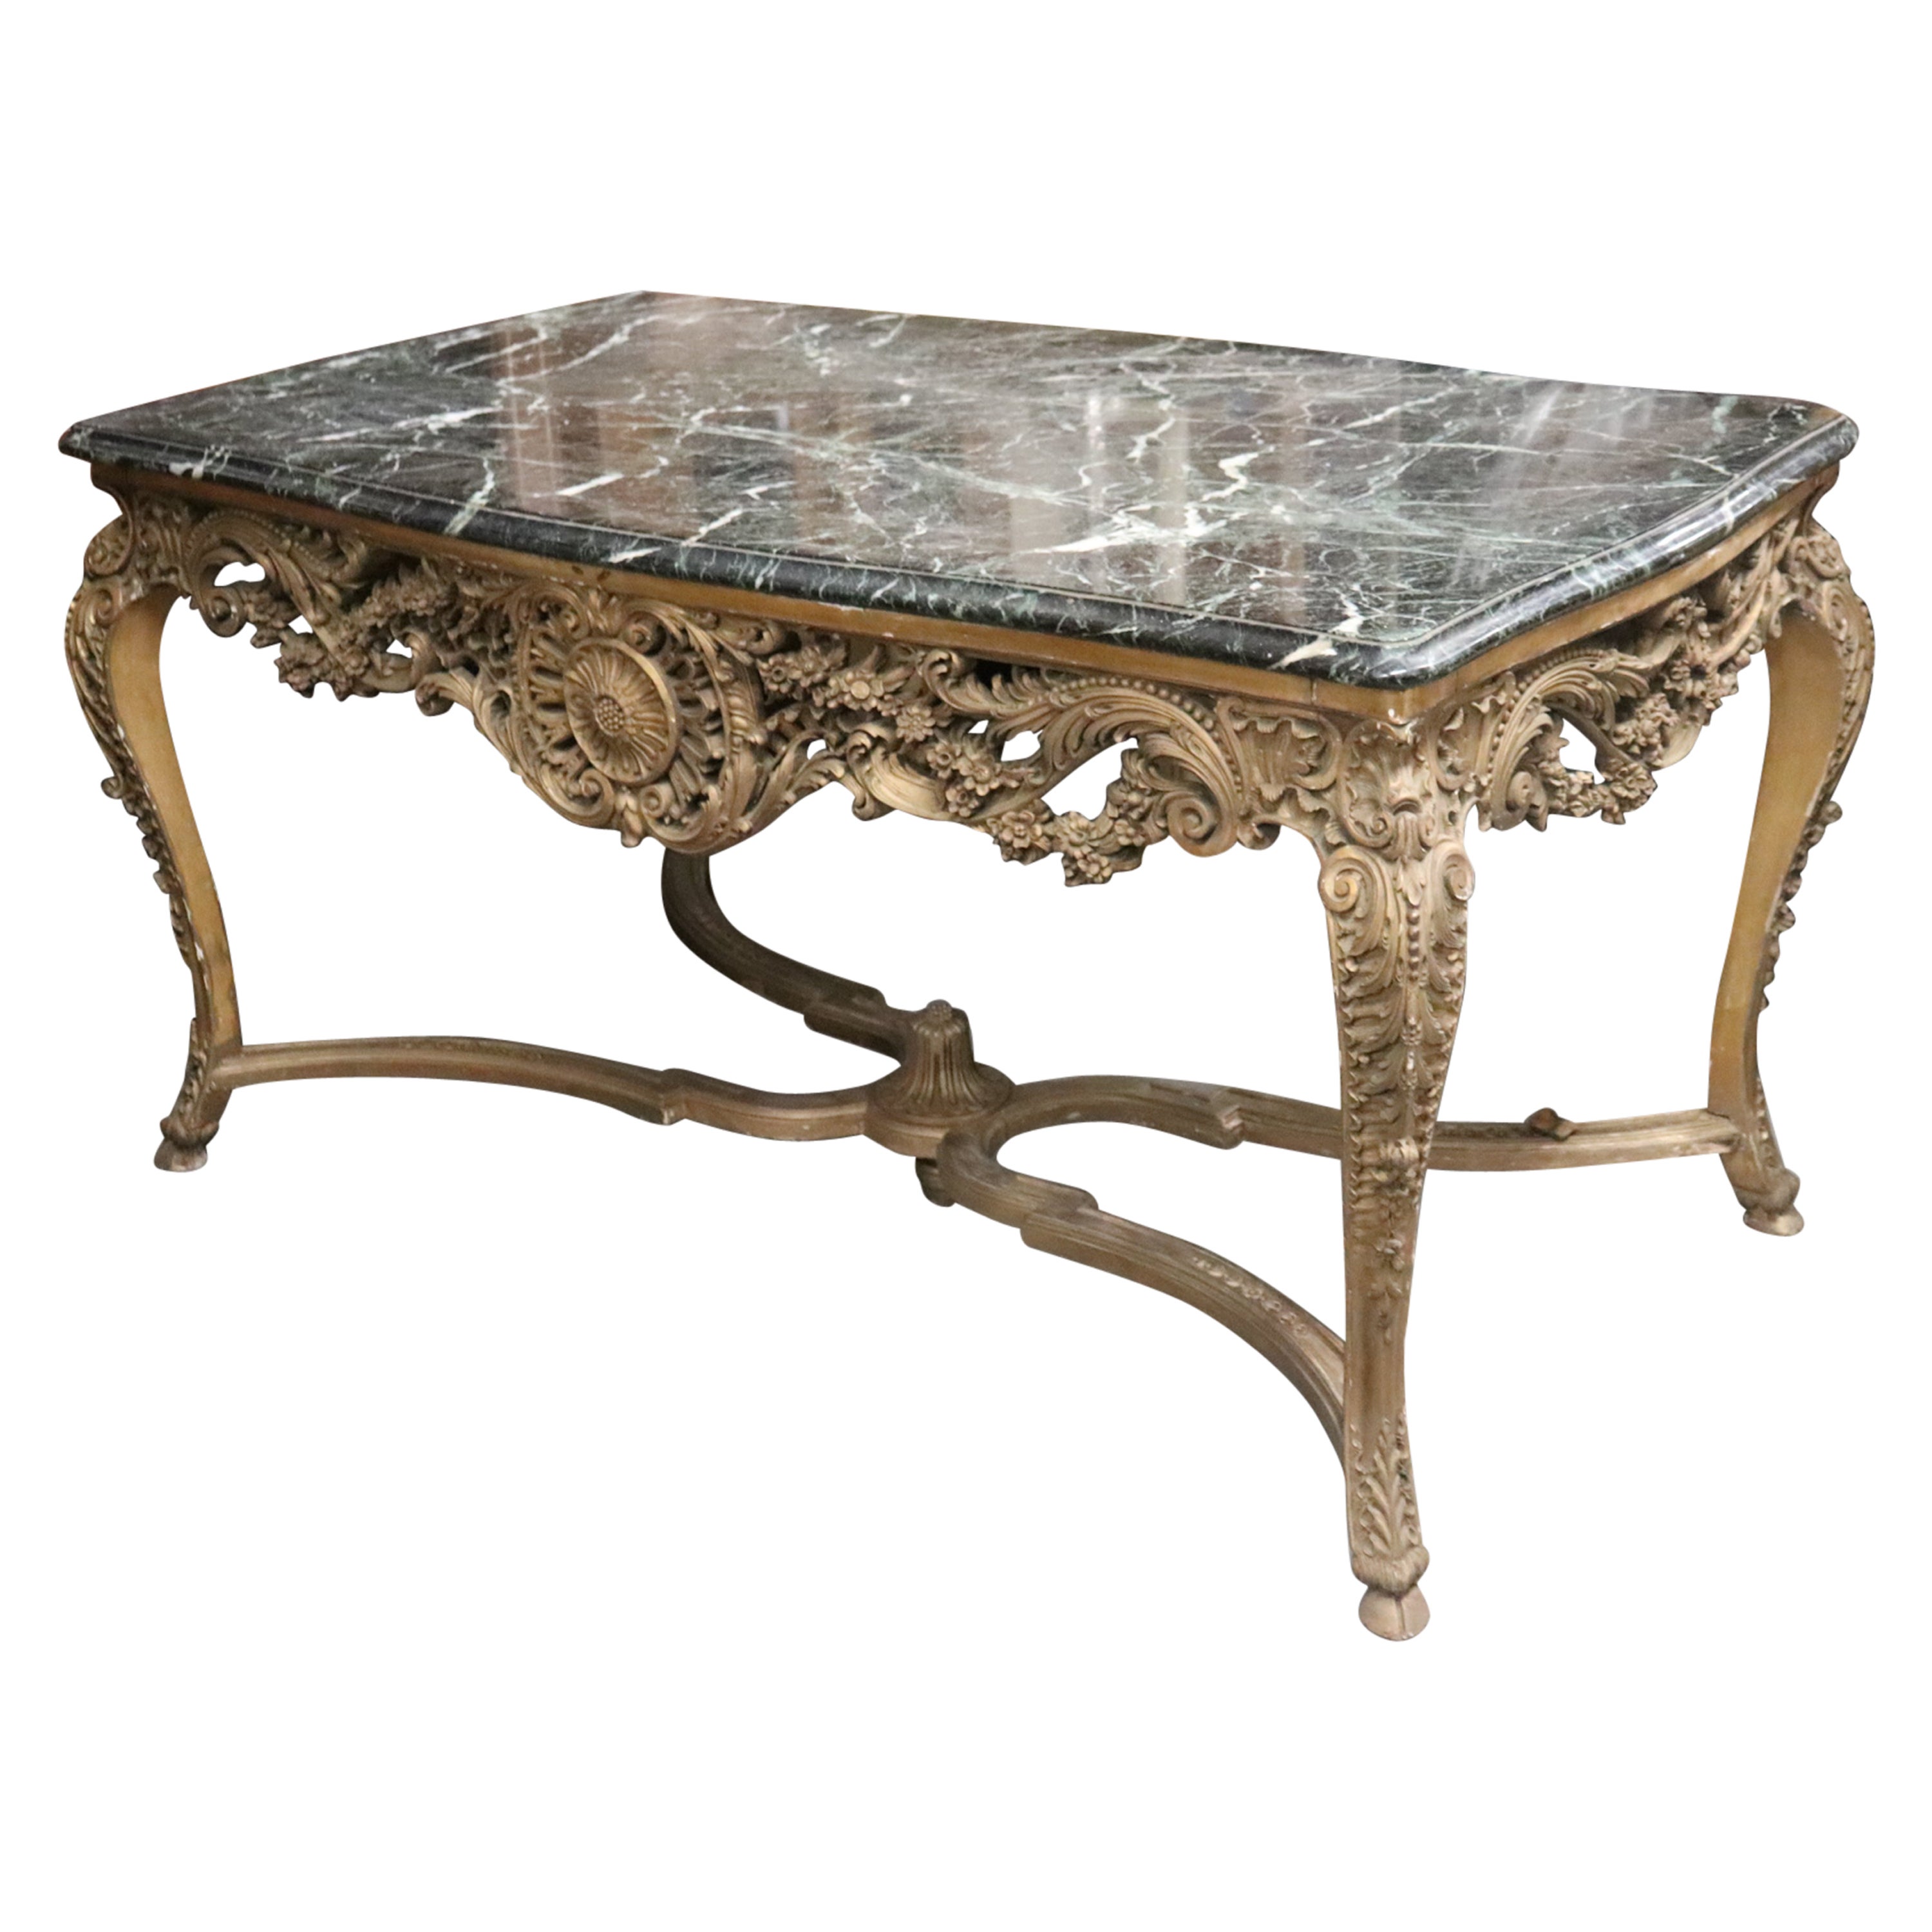 Finely Carved Gilded French Verdi Green Marble Louis XV Center Table circa 1890s For Sale